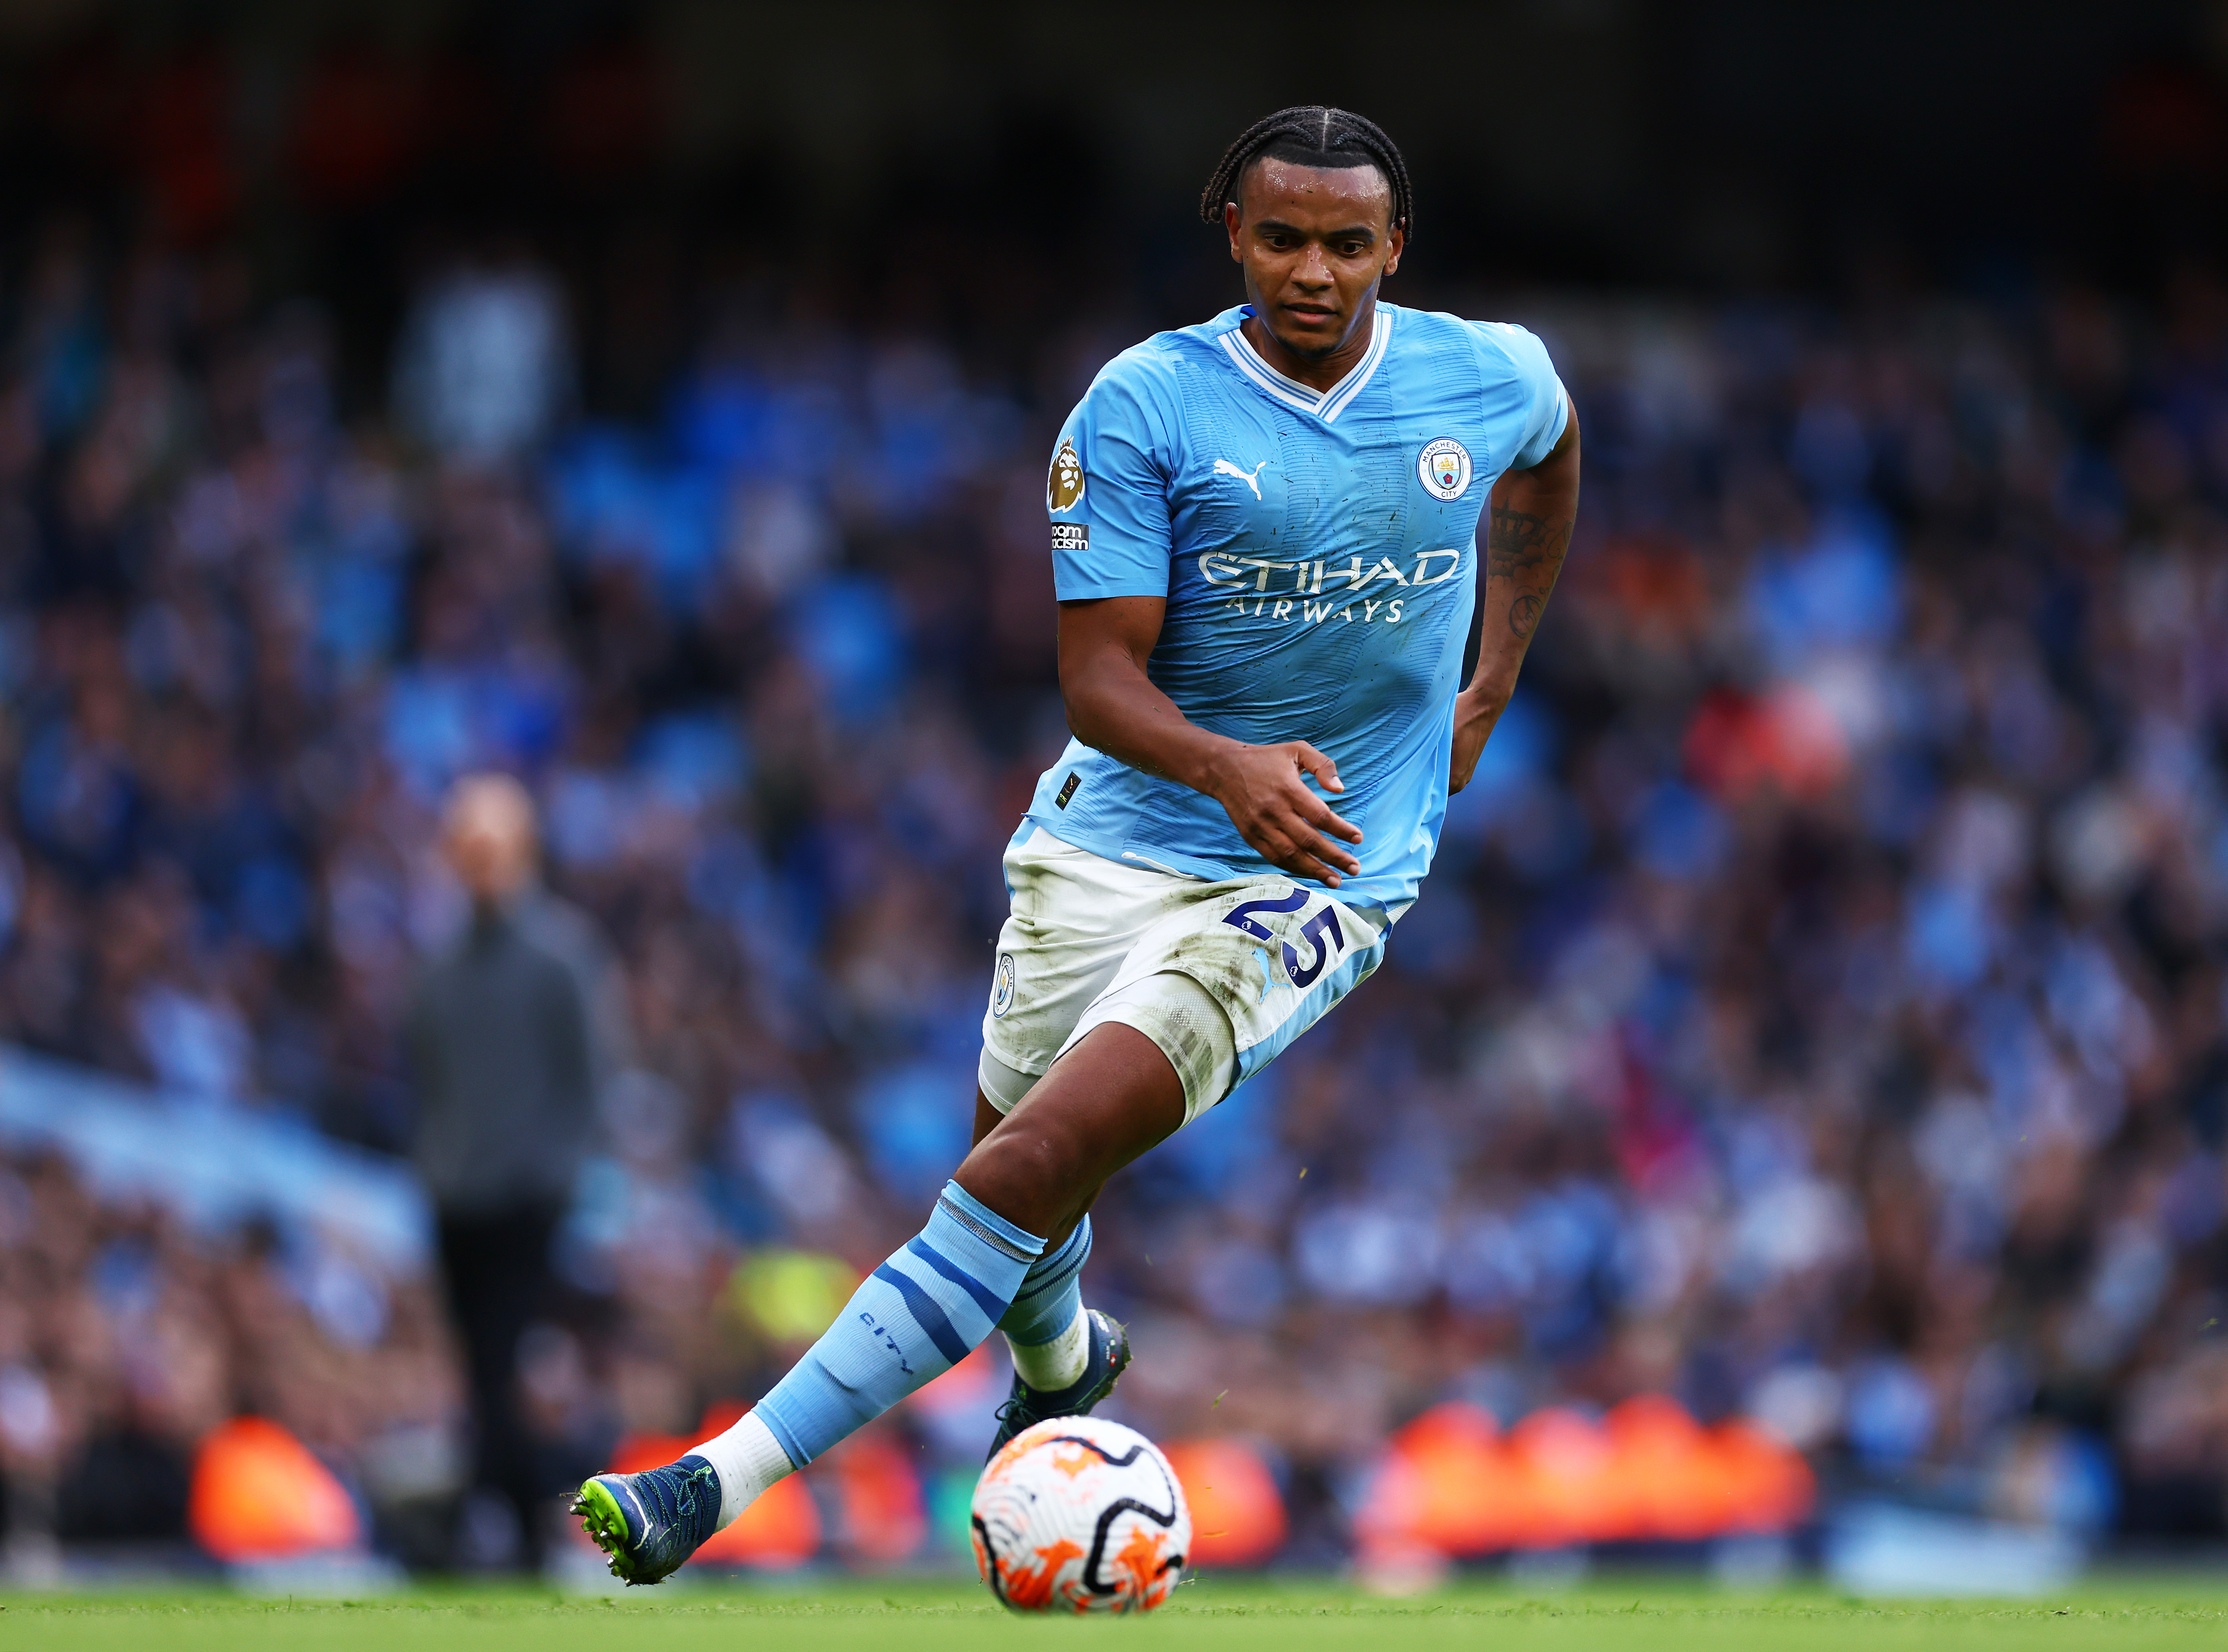 Manchester City's Manuel Akanji heads the ball during the